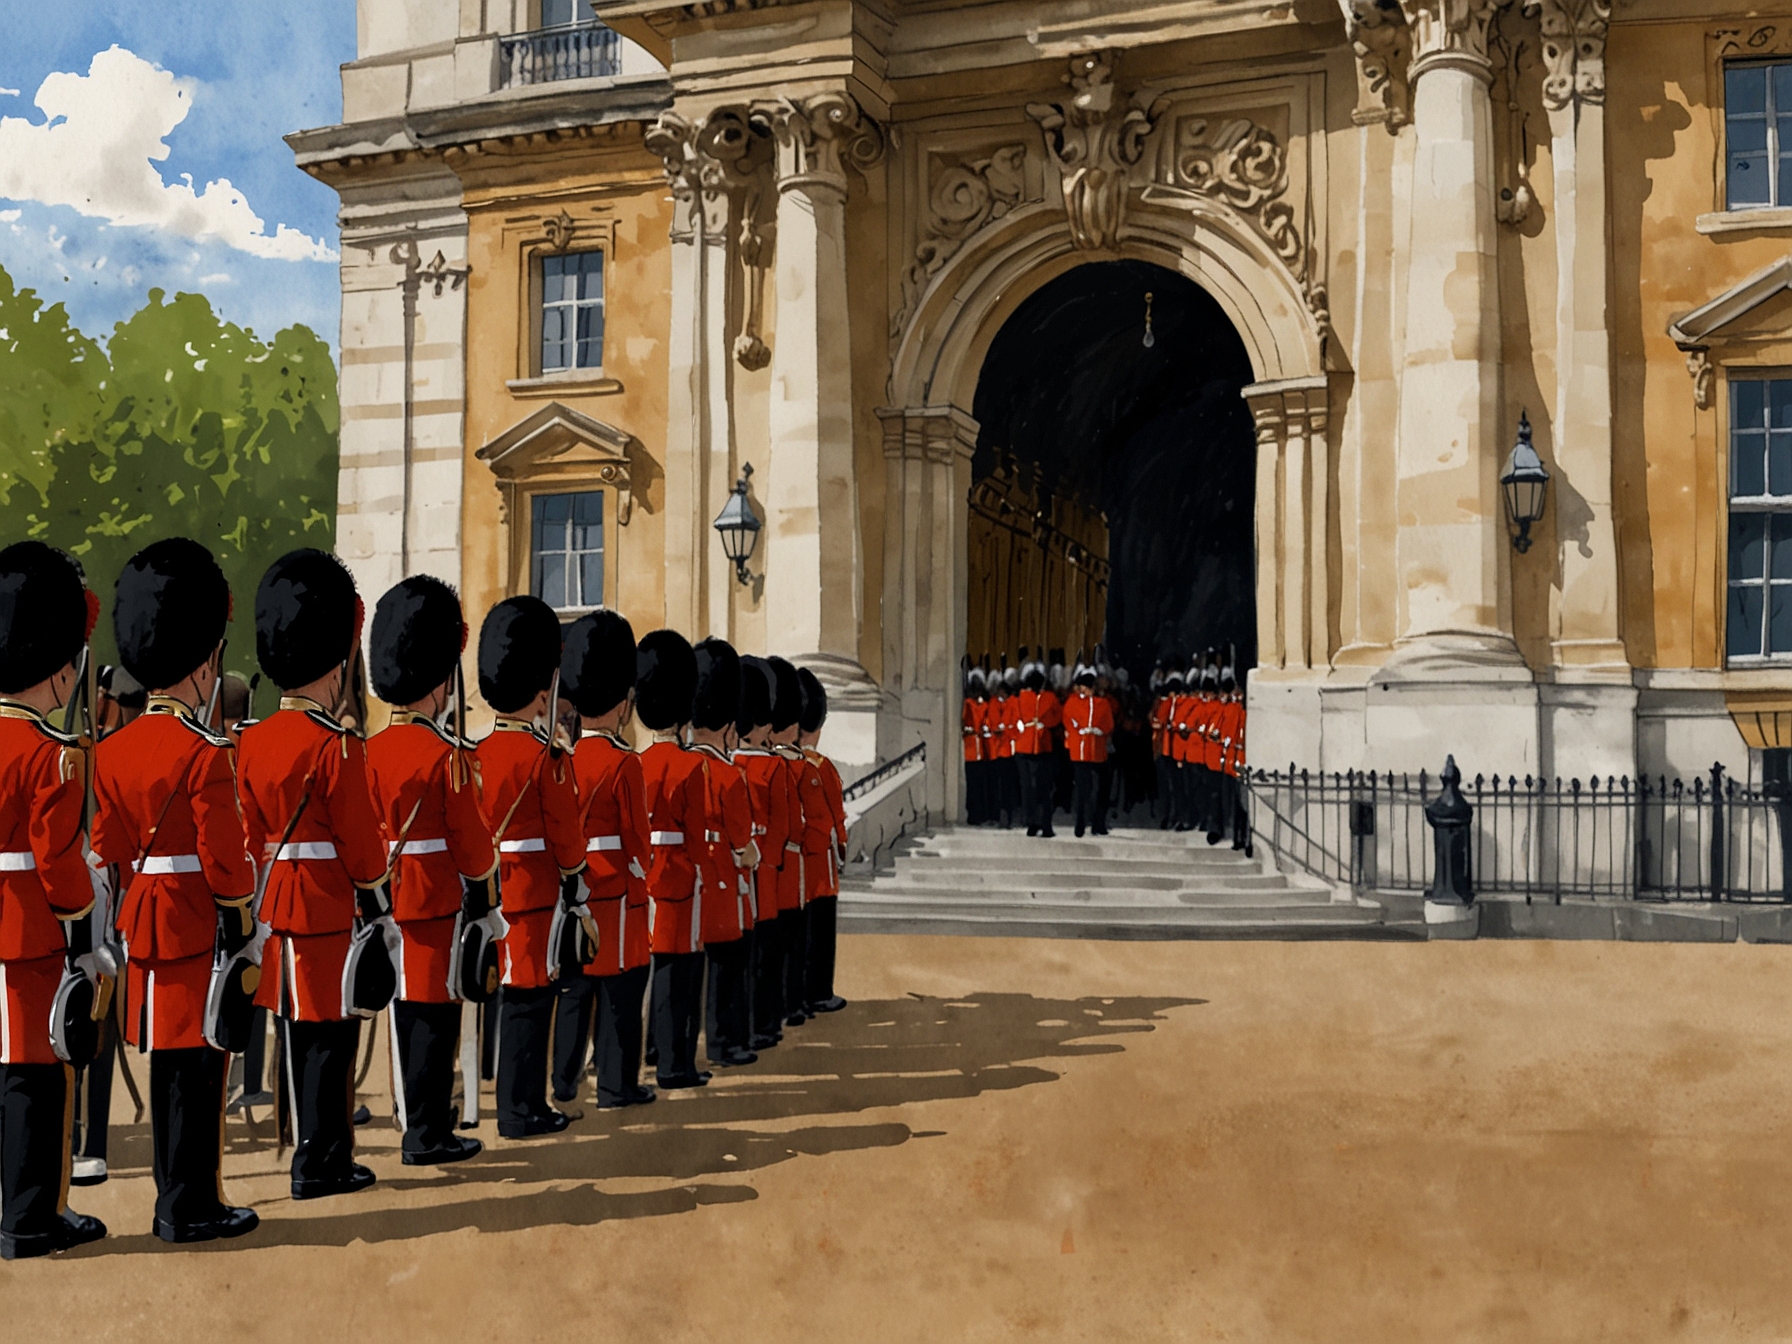 Royal Guards at Buckingham Palace switch shifts as the British Army band plays Taylor Swift's iconic songs, integrating modern pop culture with time-honored tradition.